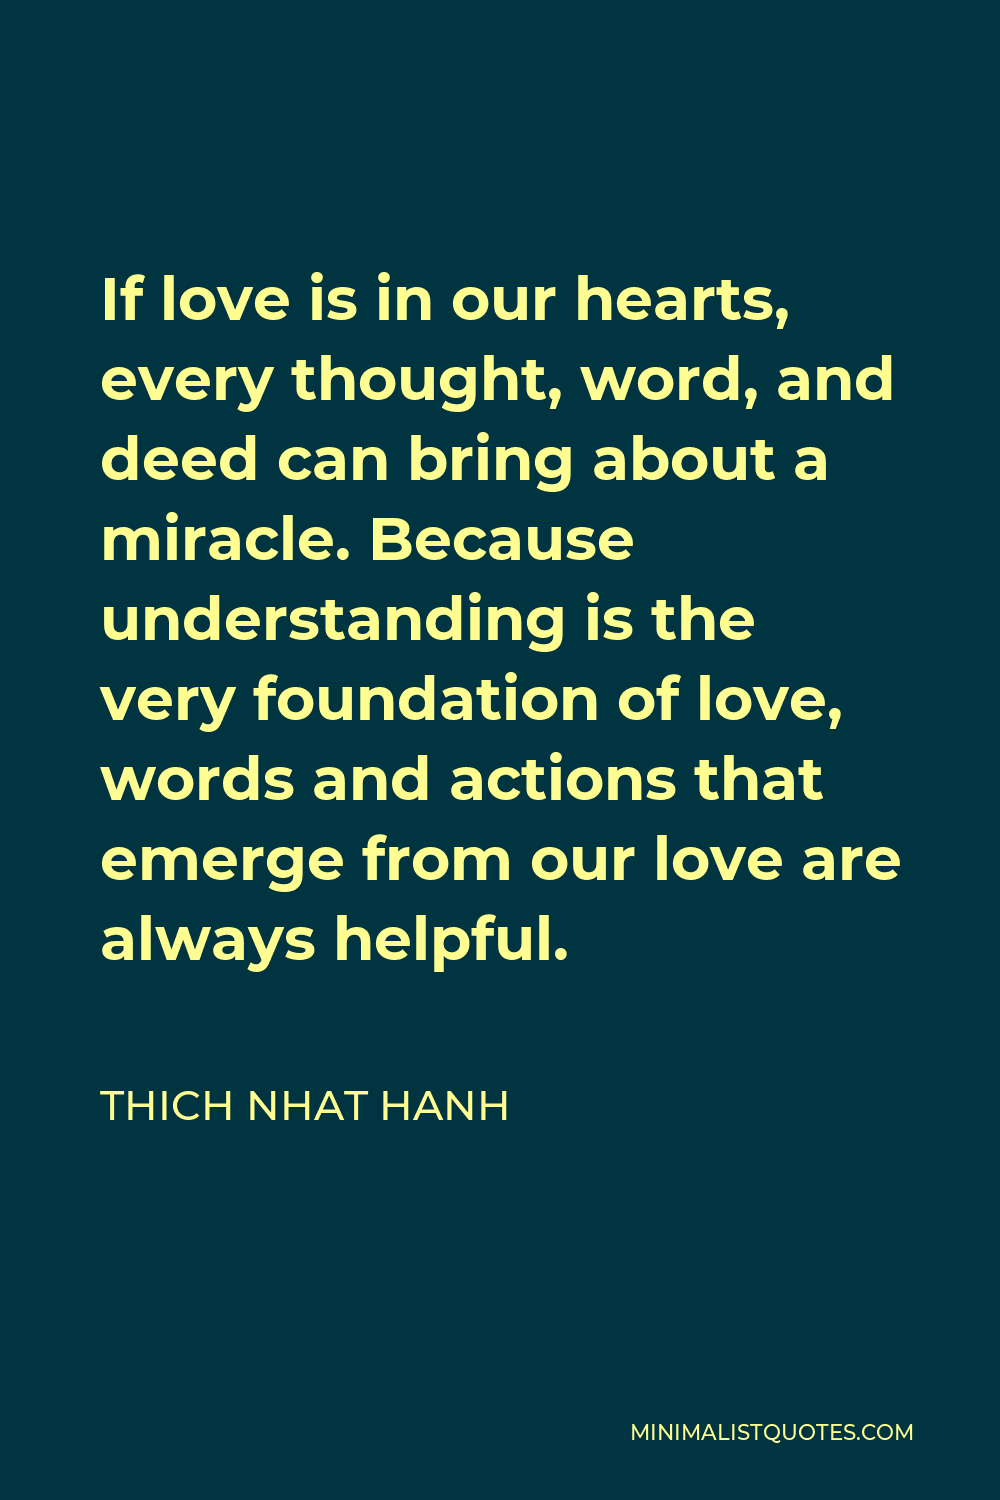 Thich Nhat Hanh Quote - If love is in our hearts, every thought, word, and deed can bring about a miracle. Because understanding is the very foundation of love, words and actions that emerge from our love are always helpful.